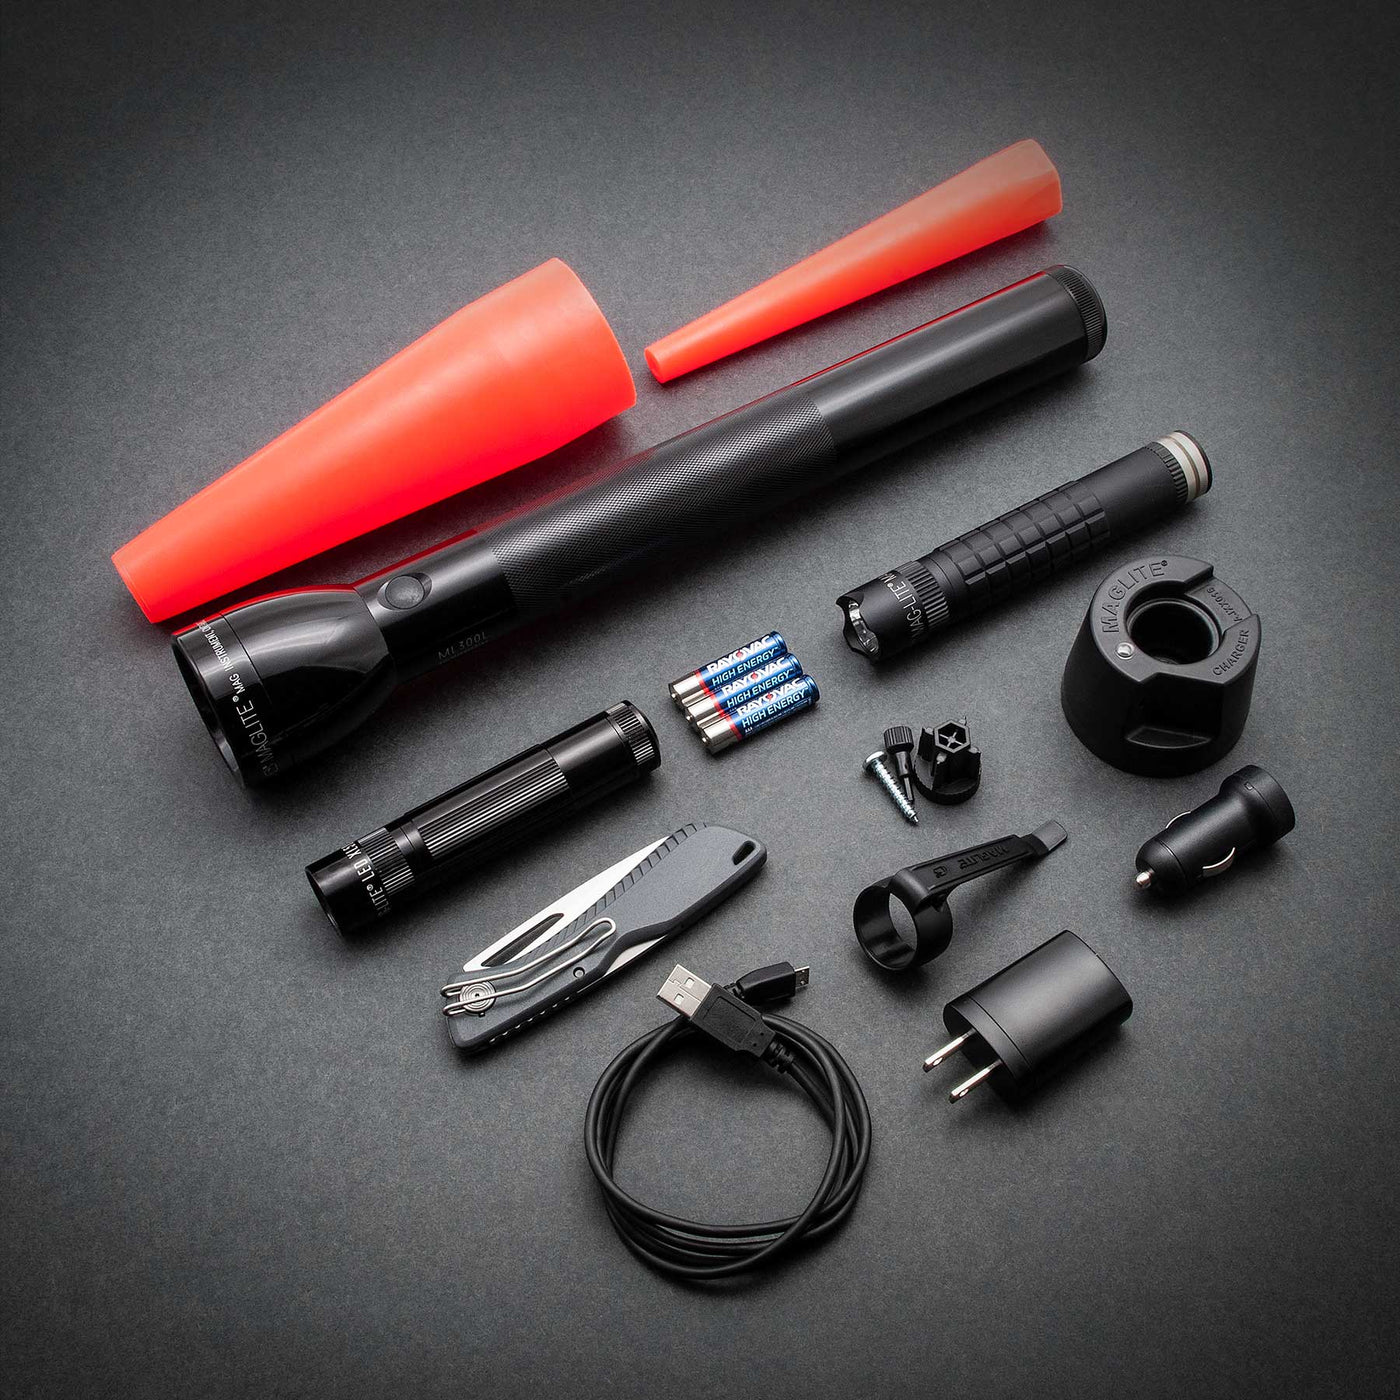 Maglite ML300L 4D LED, Maglite XL50 LED, Maglite MAG-TAC LED Rechargeable System, a red safety wand for the XL50 and the ML300L, three AAA premium alkaline batteries and a pocket clip for the XL50 Flashlight. Also includes a Gerber Sharkbelly.